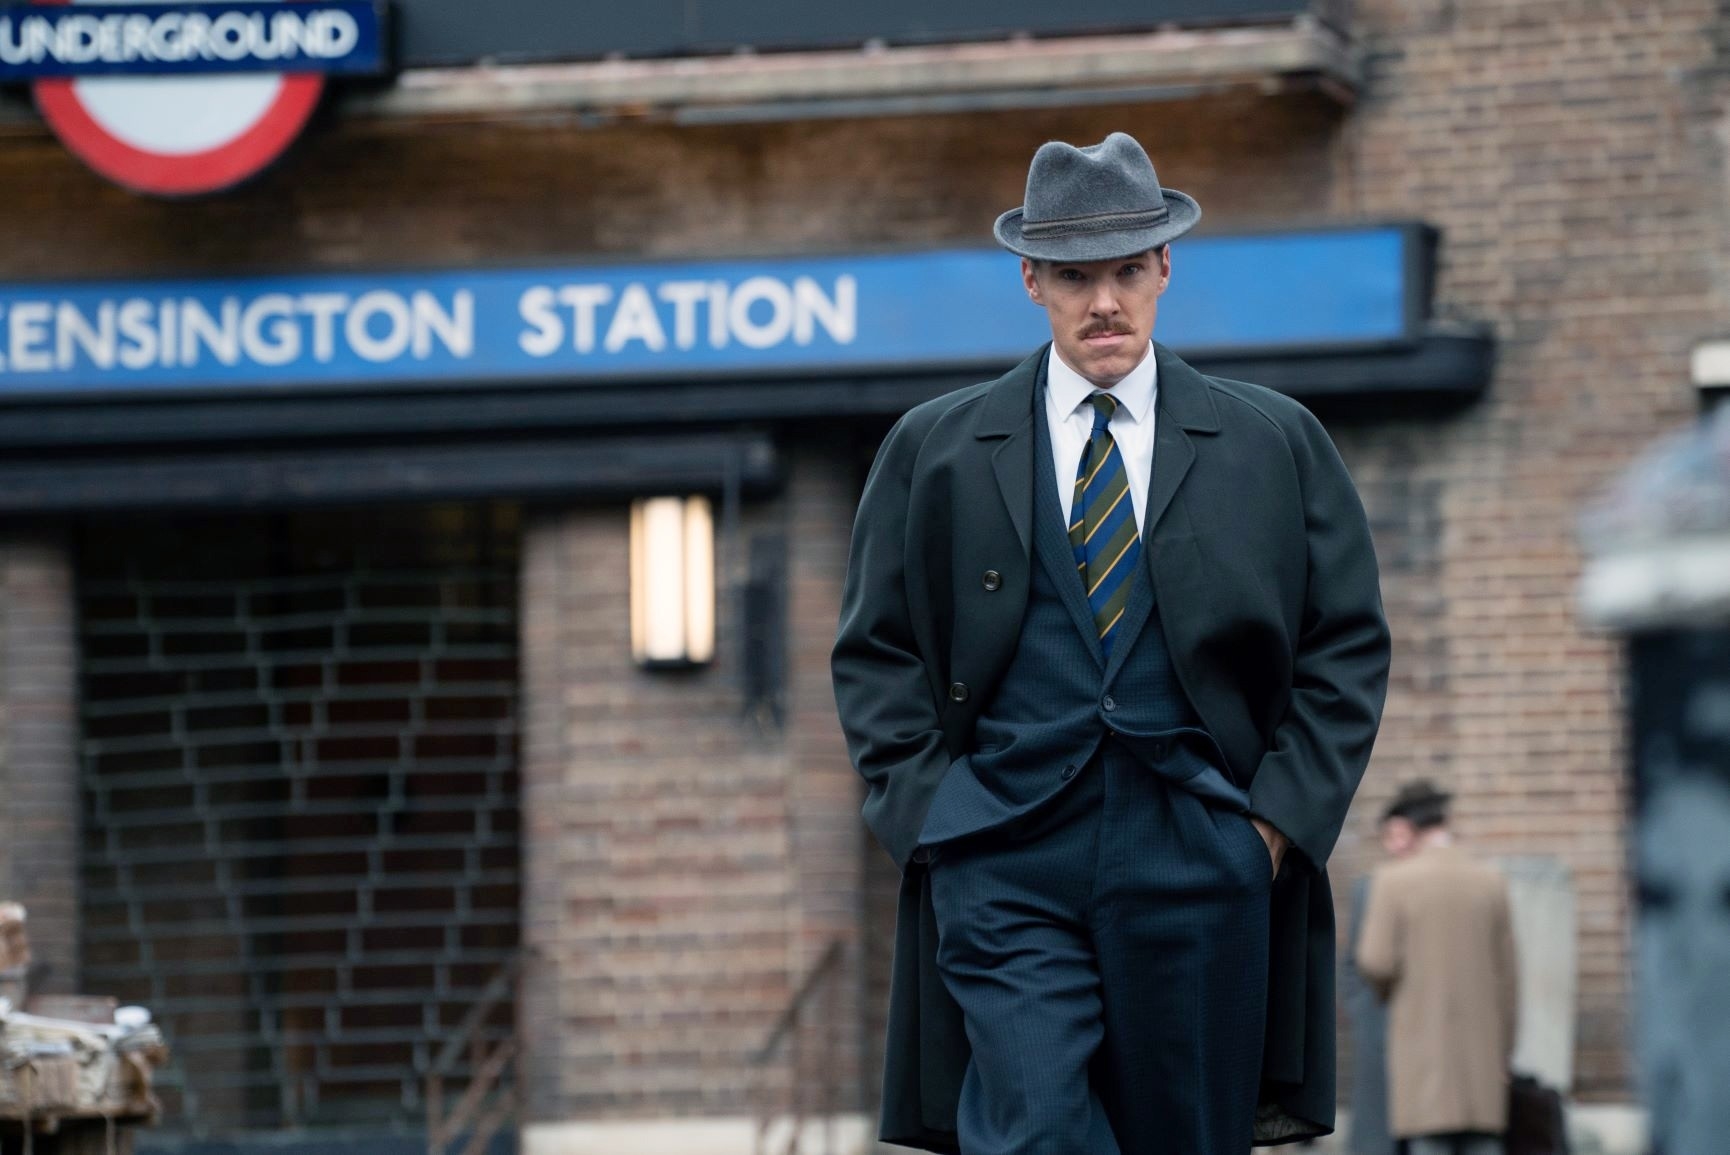 in a scene, Benedict in a coat and striped tie outside Kensington Station